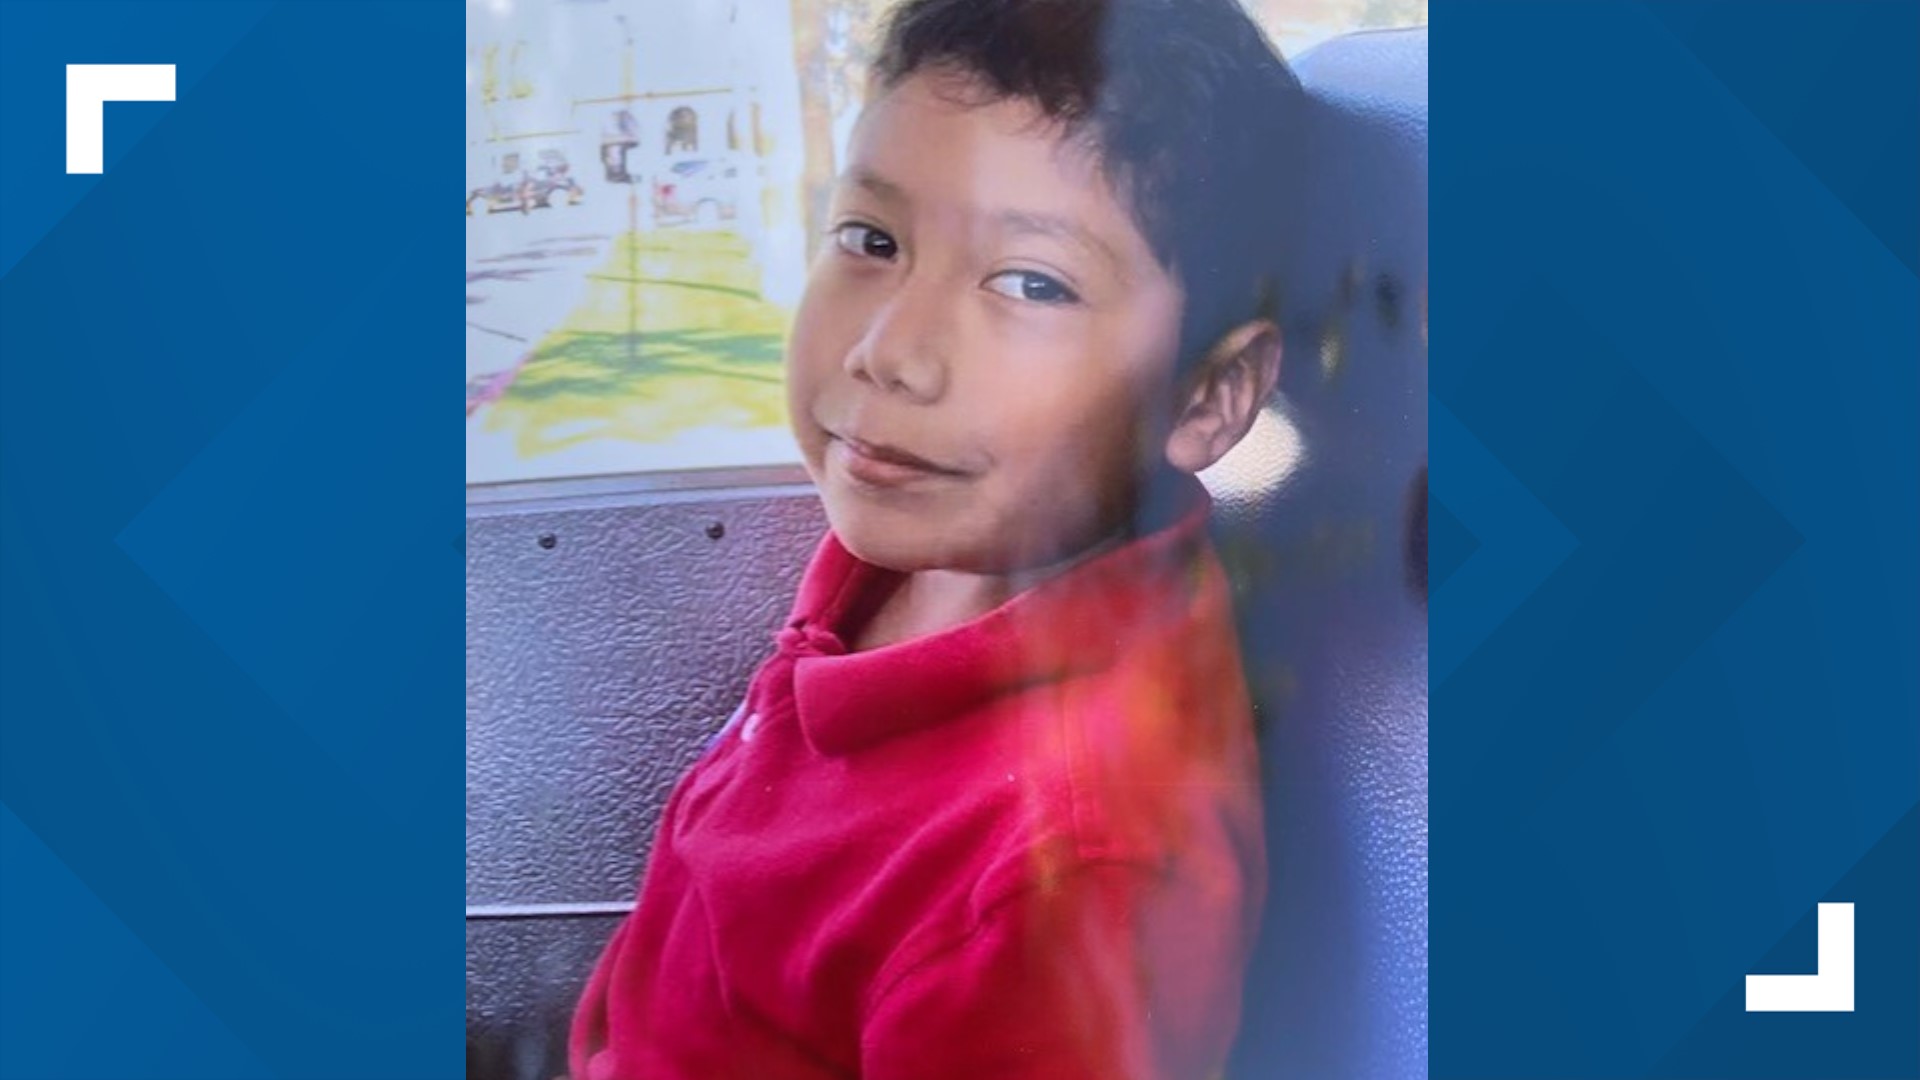 Jesus Garcia was a happy, lovable, 9-year-old boy. His family has identified him as the child who died when a fire broke out in a Tempe duplex Wednesday afternoon.